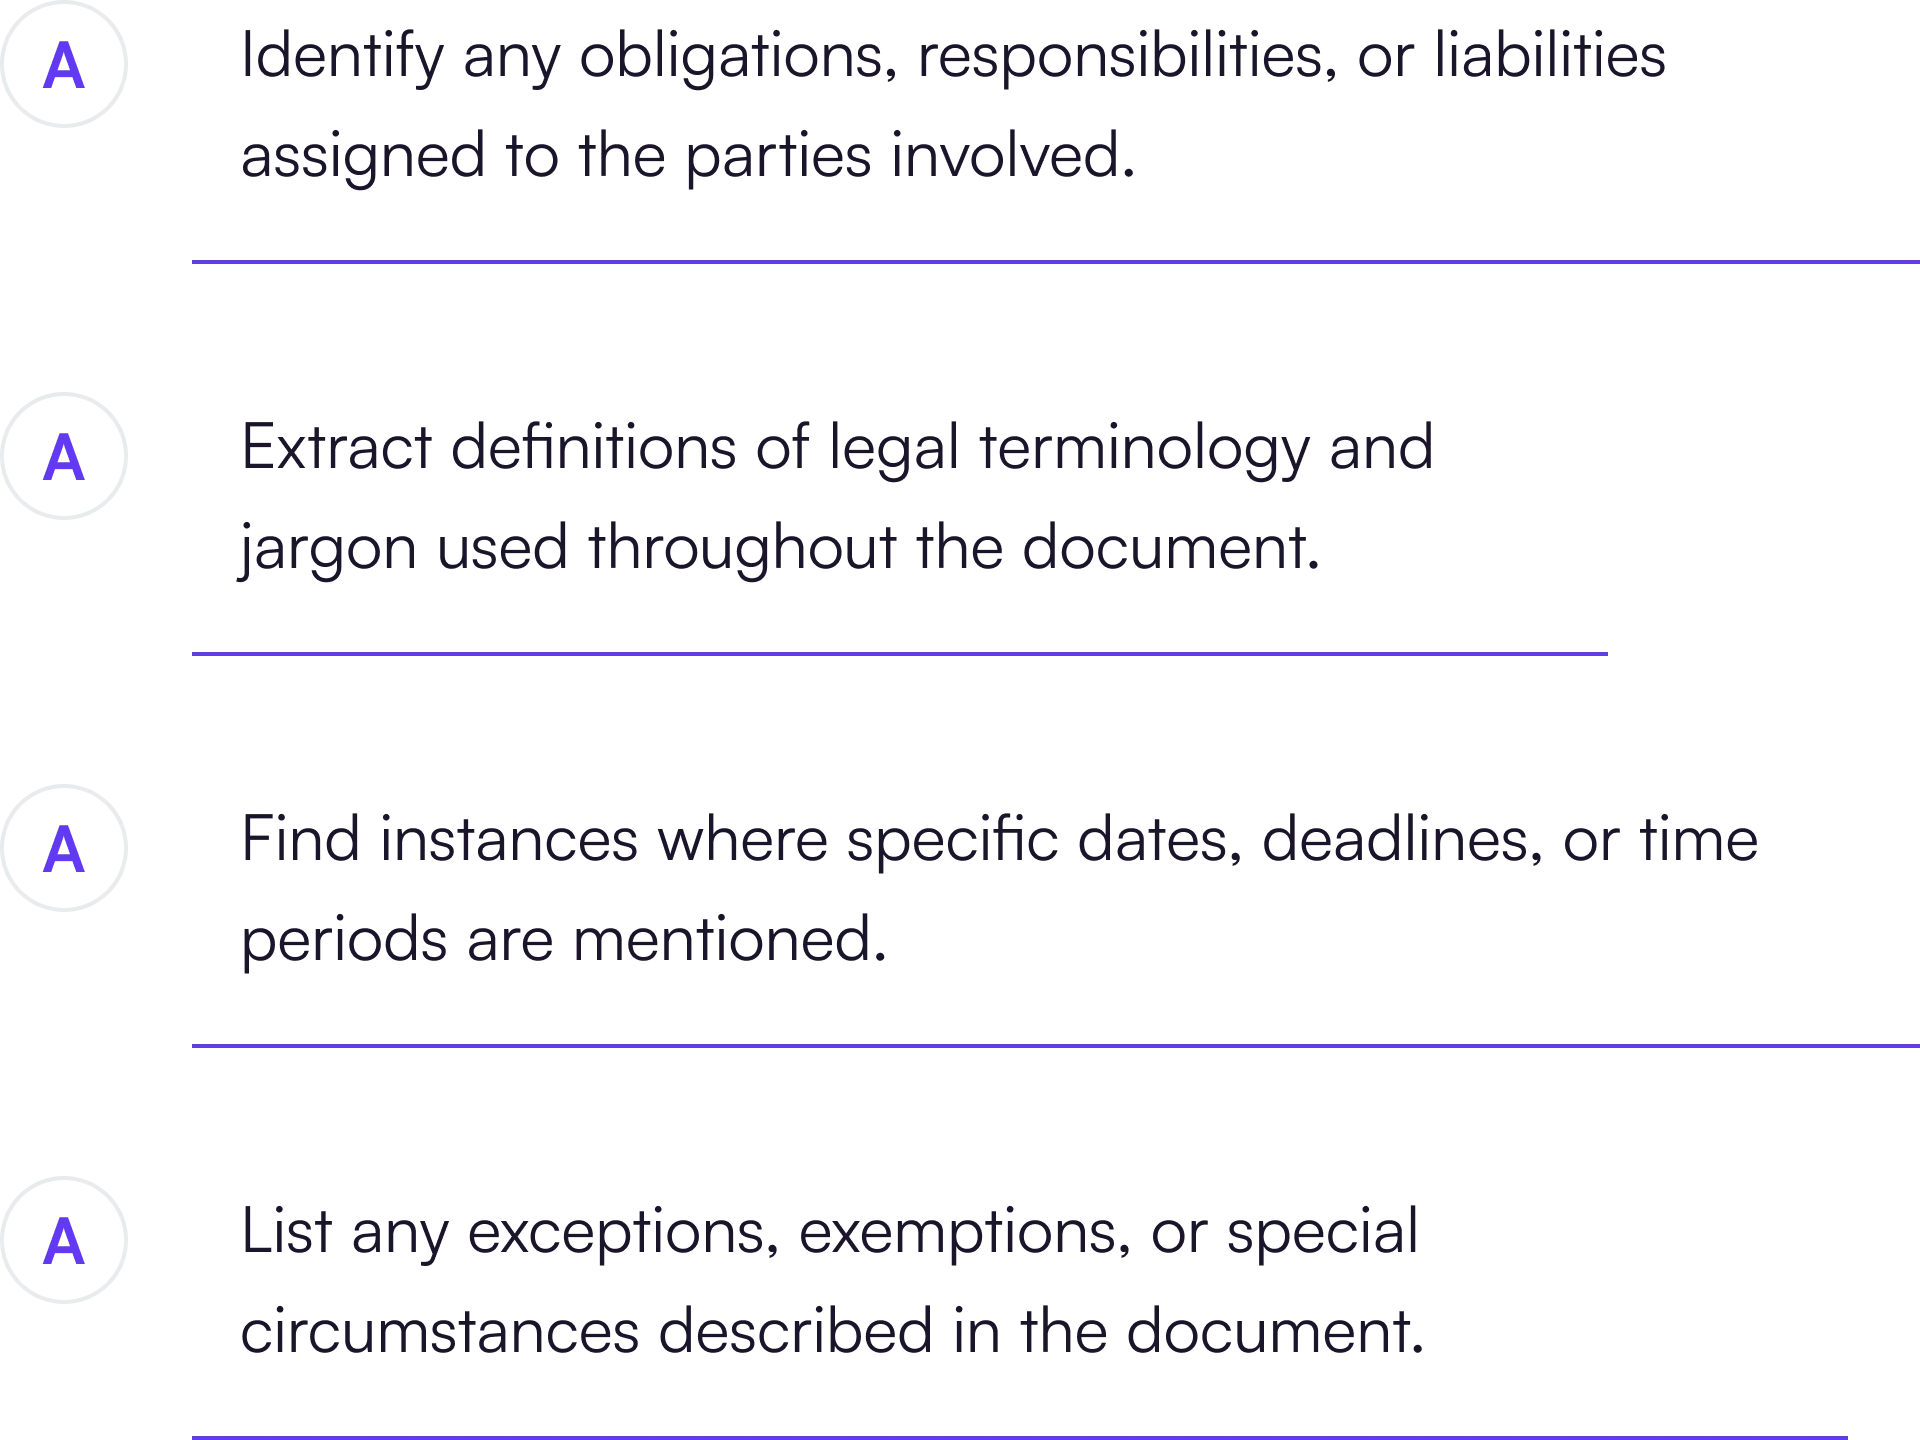 Additional questions for the use case - Decode Legal Documents